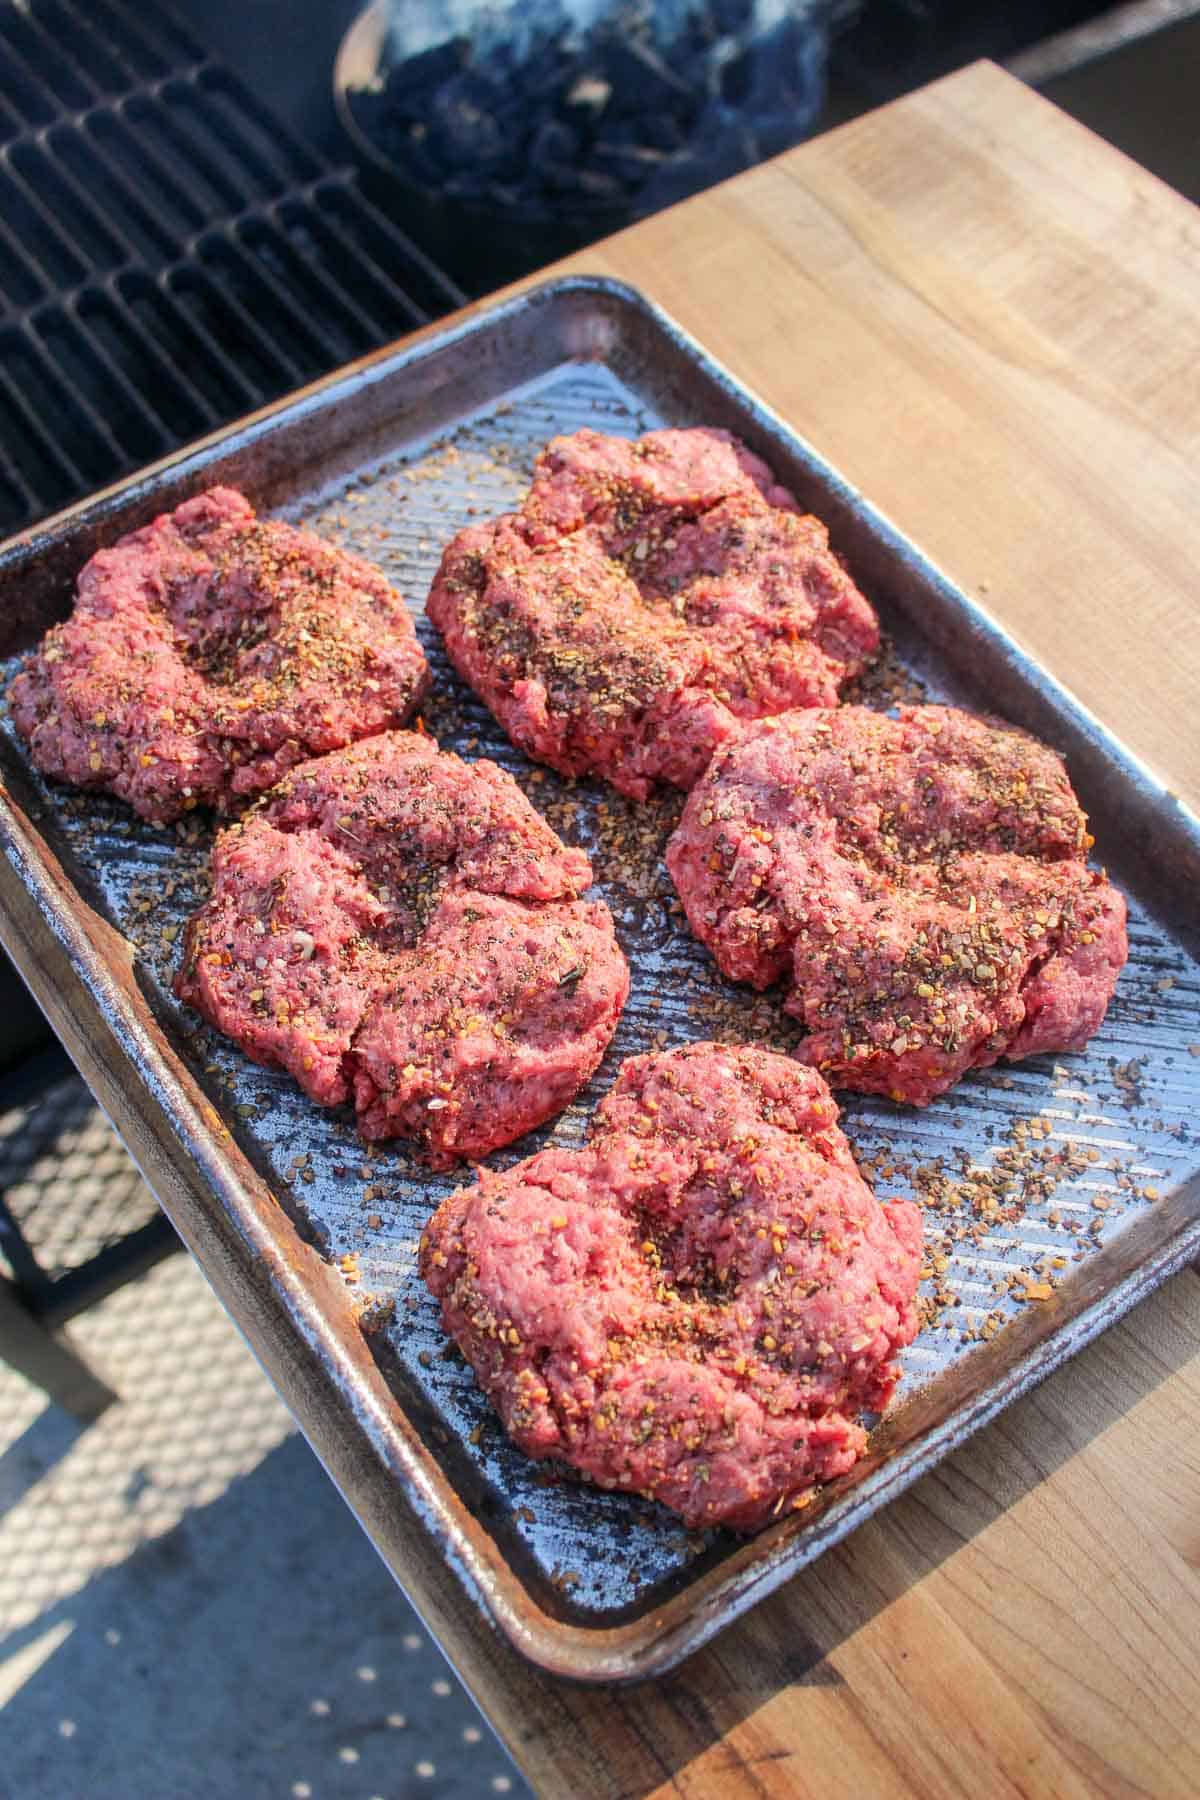 The seasoned burger patties before getting placed on the grill.